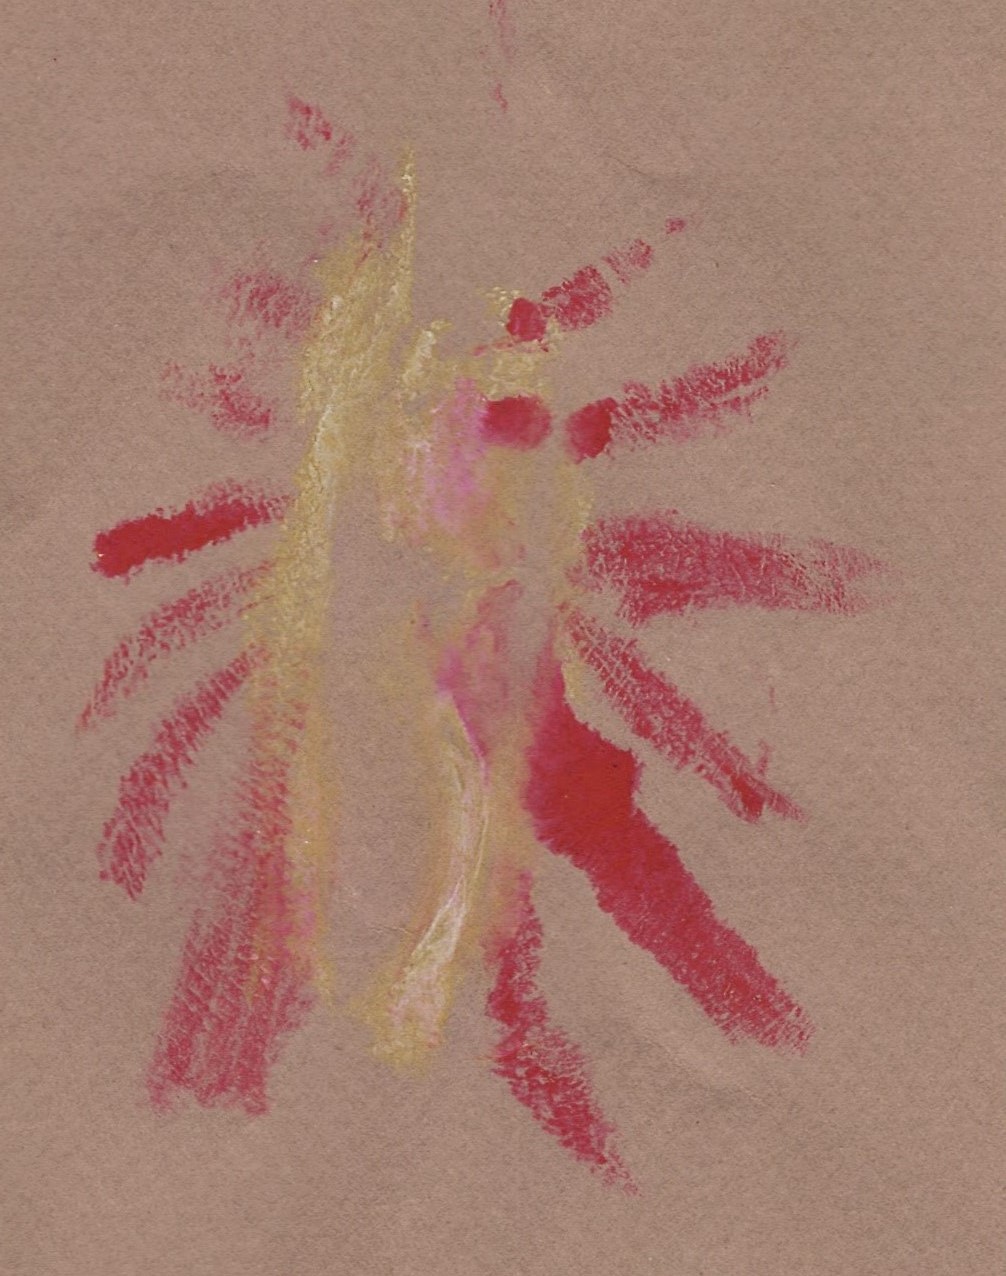 print made from yellow and red lines painted on labia